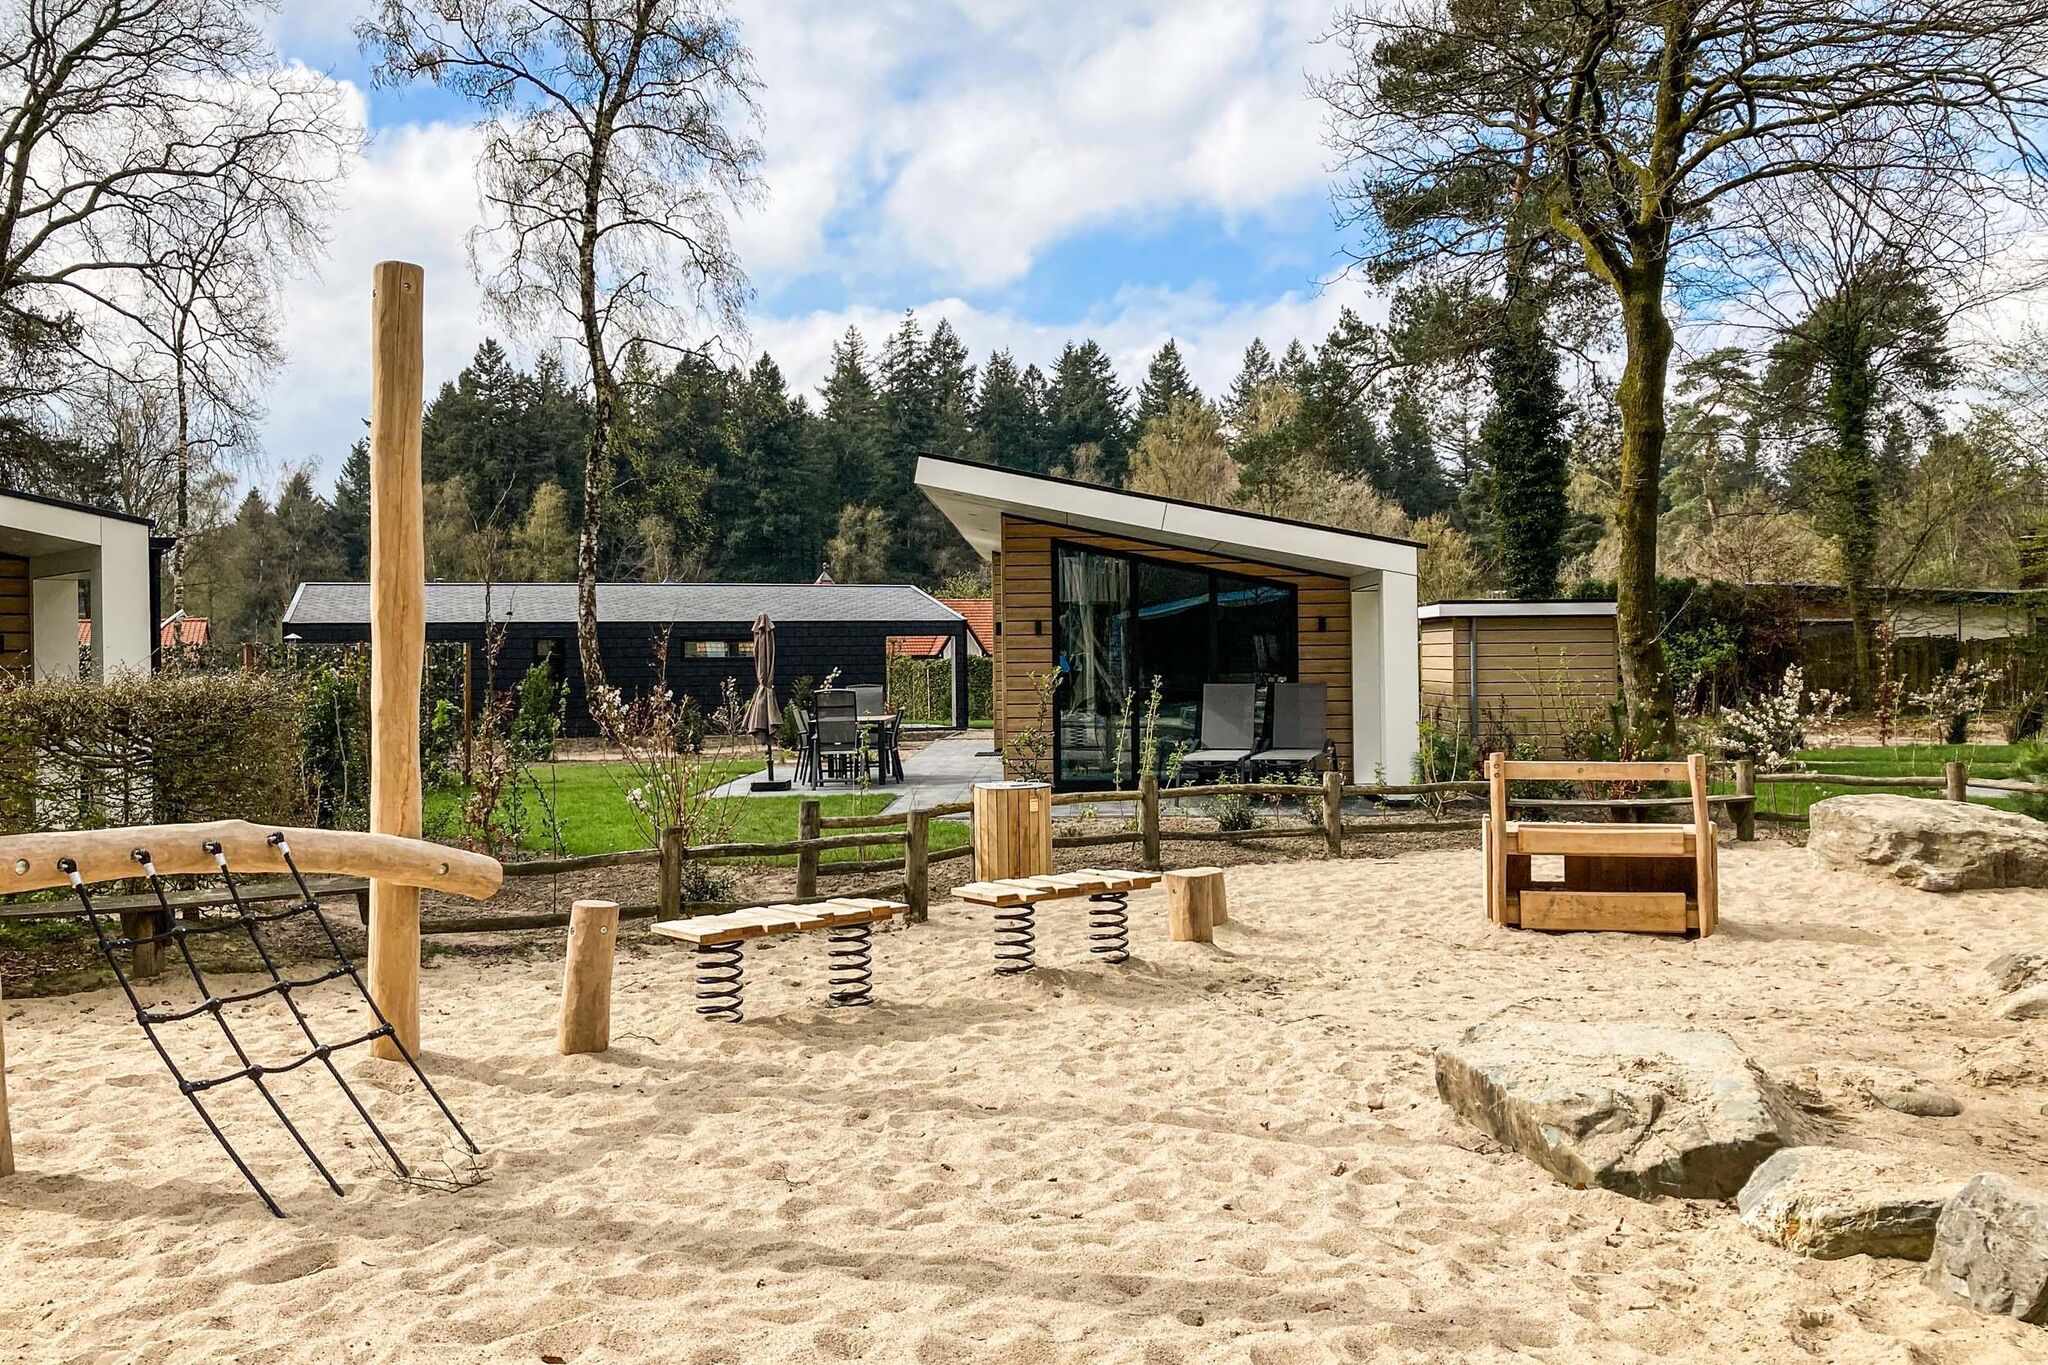 Chalet located at the playground in Veluwe